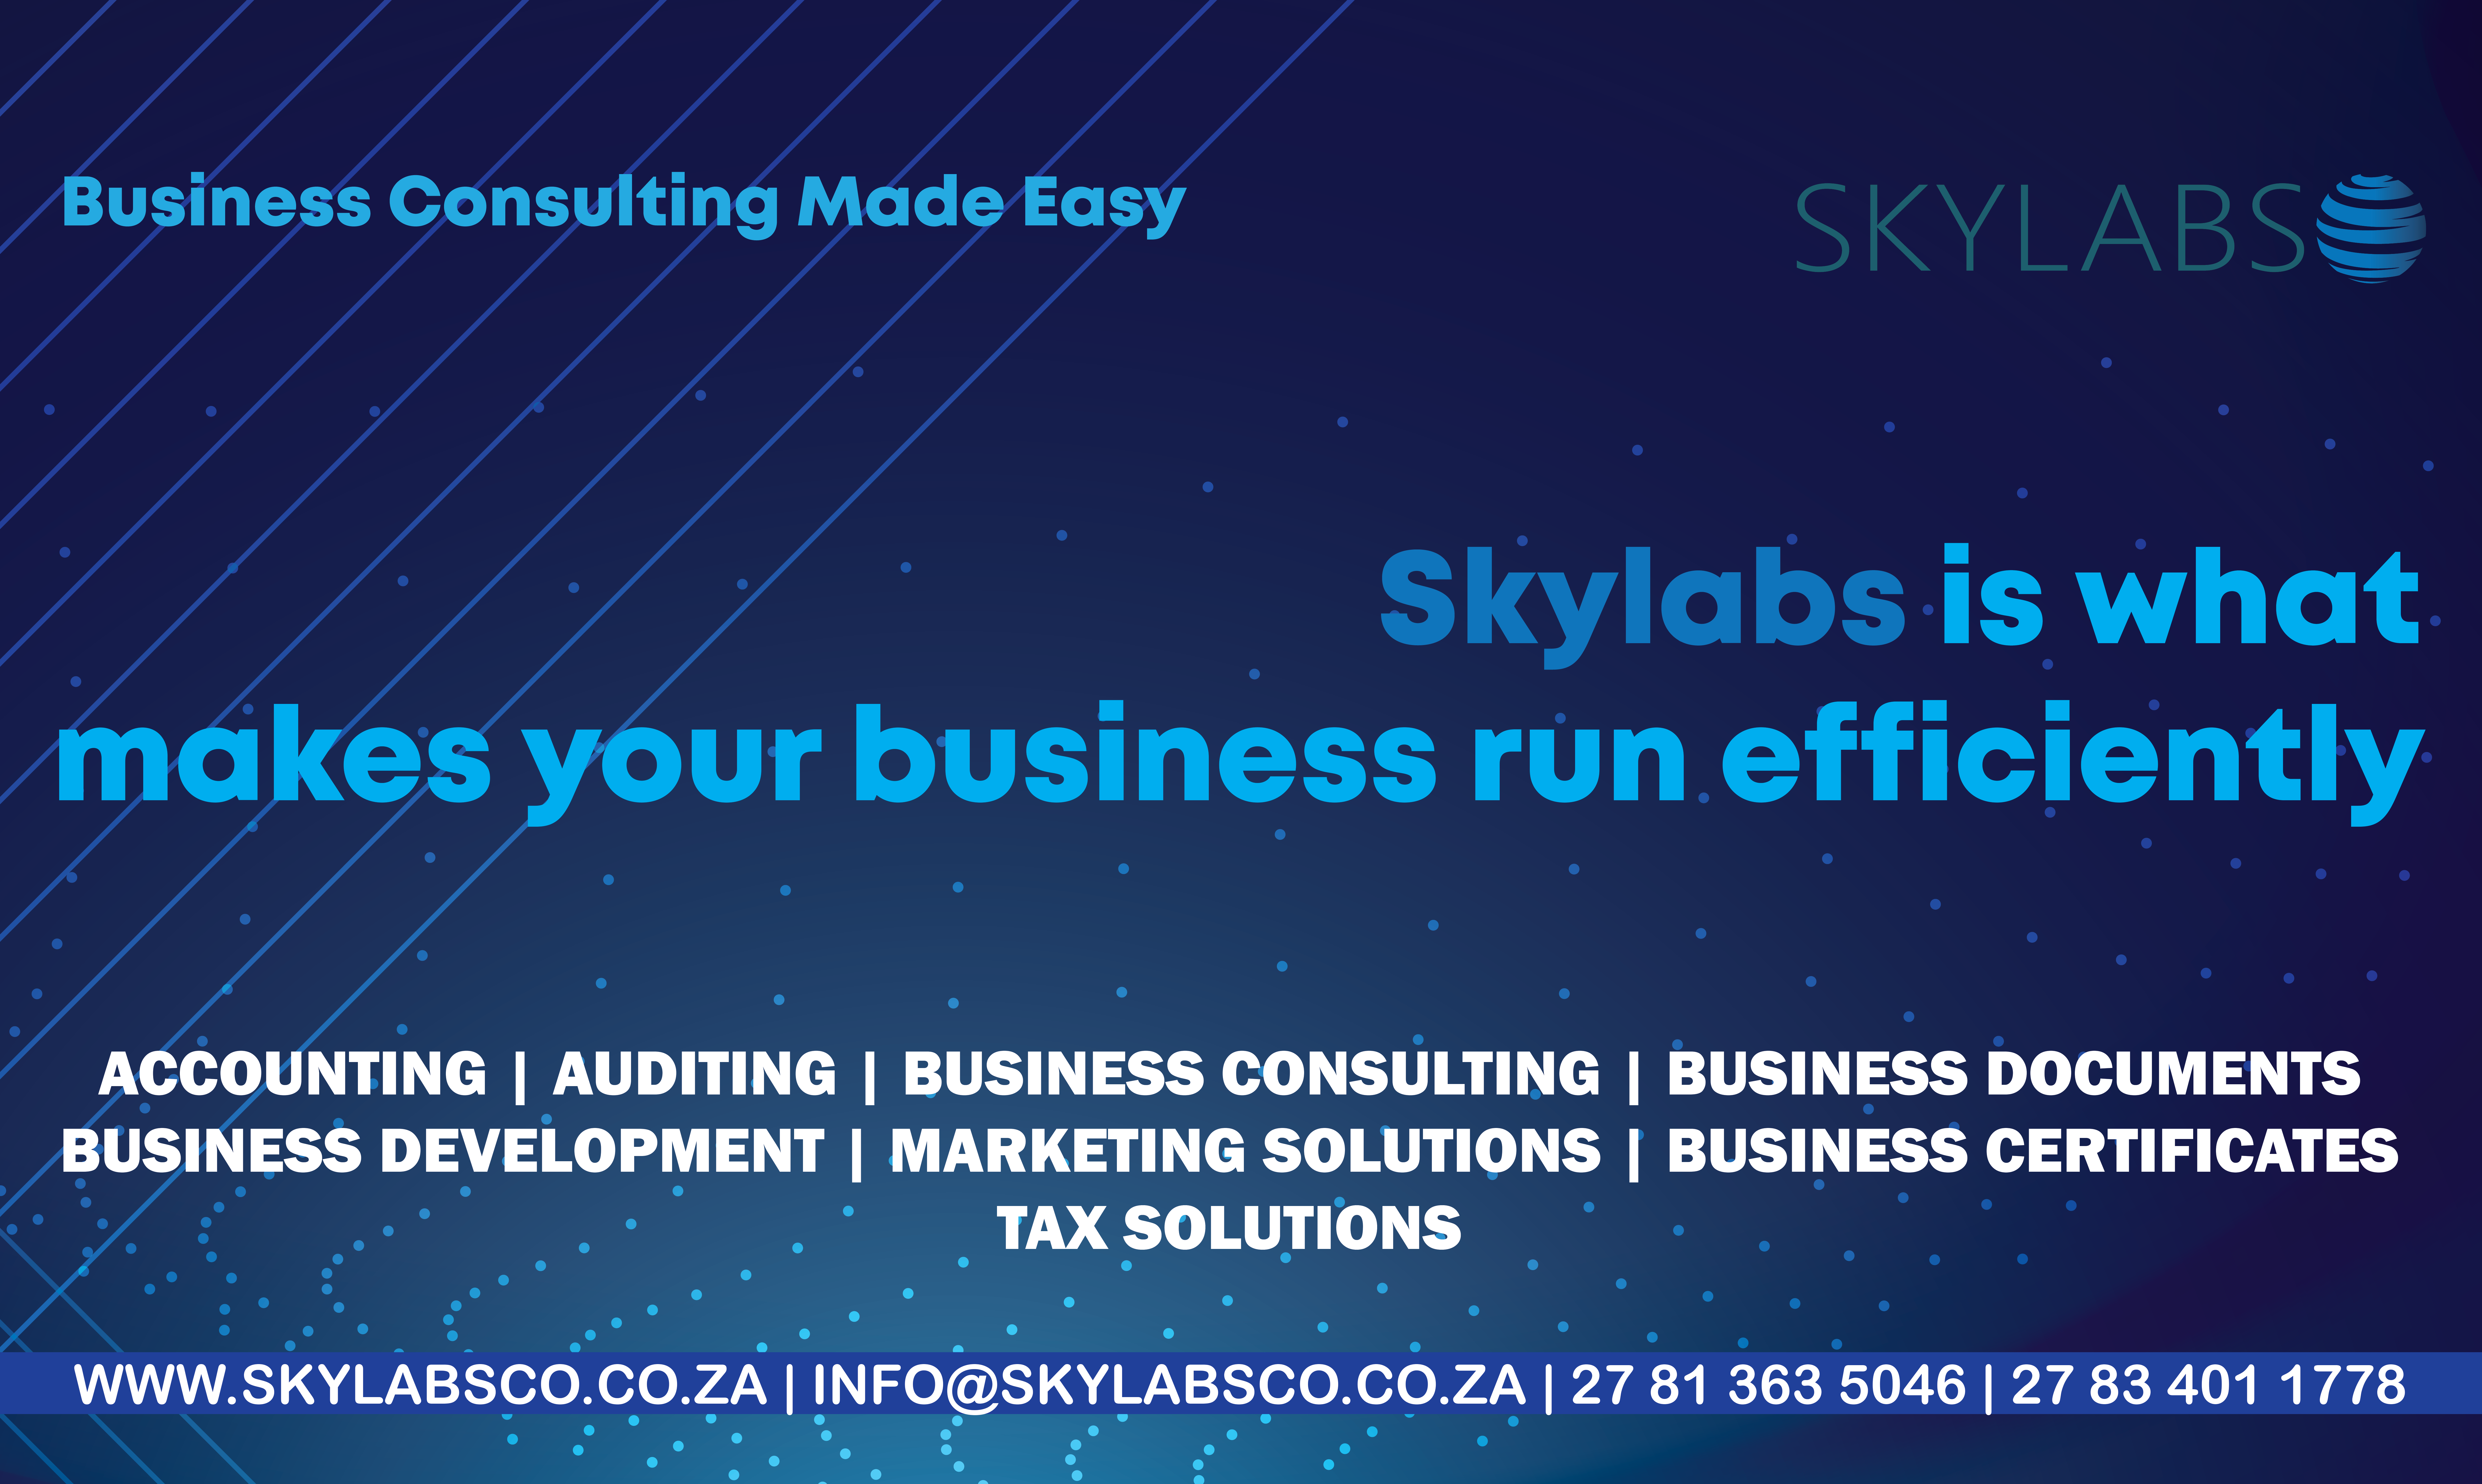 Business Consulting Made Easy!